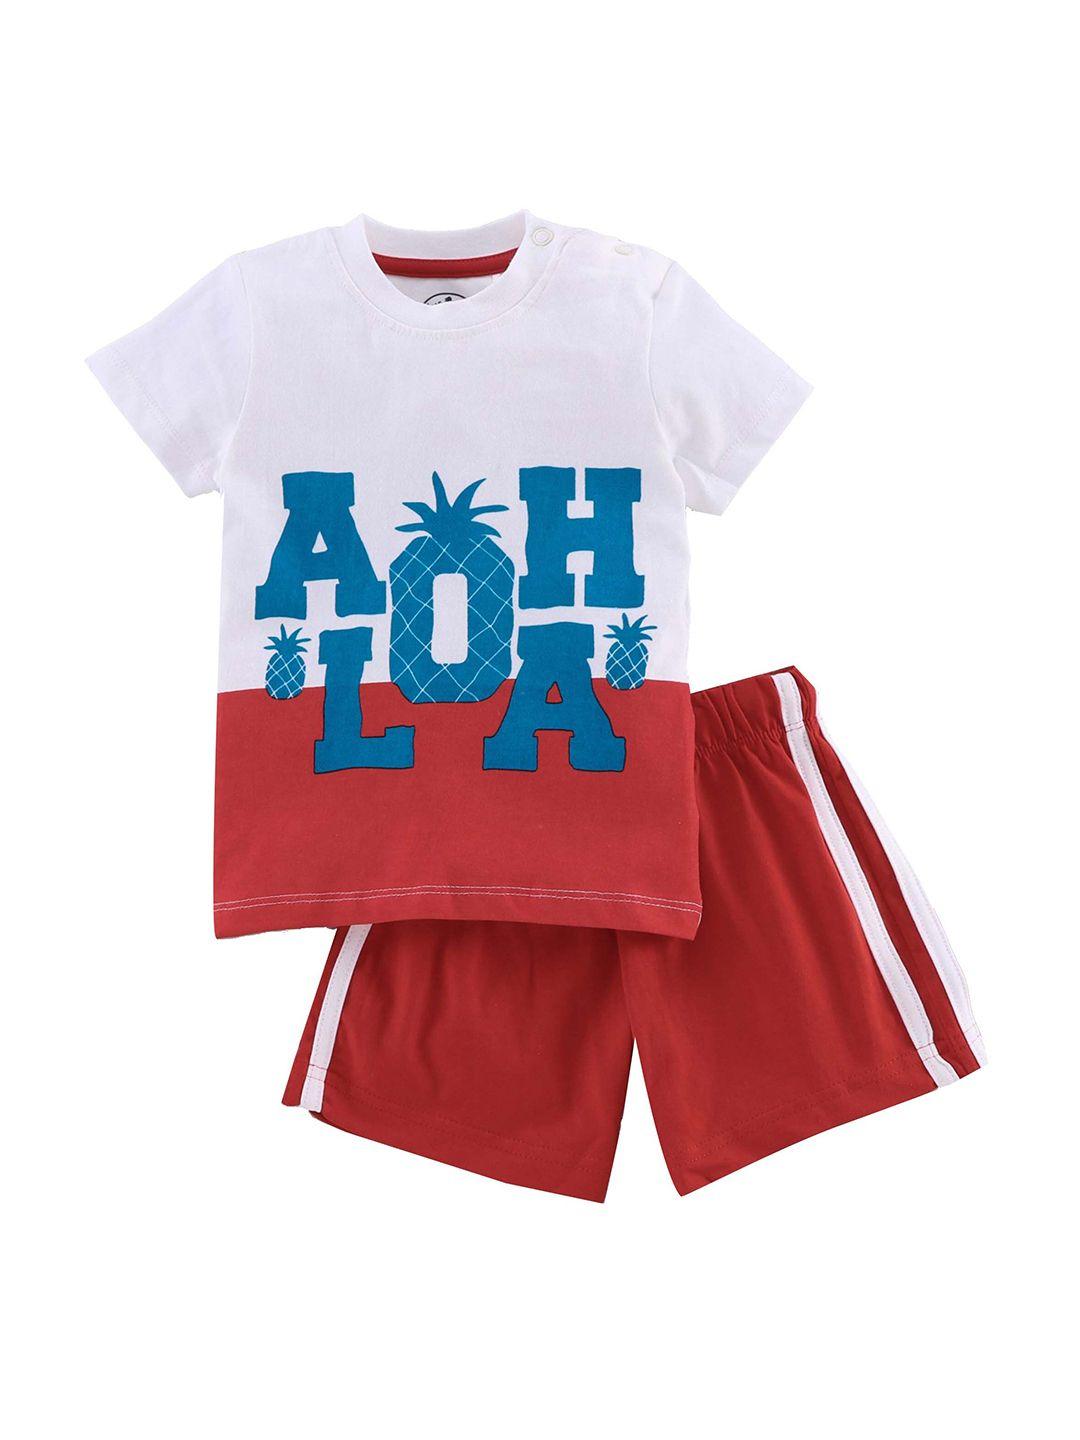 juscubs infant boys printed pure cotton round neck t-shirt with shorts clothing set